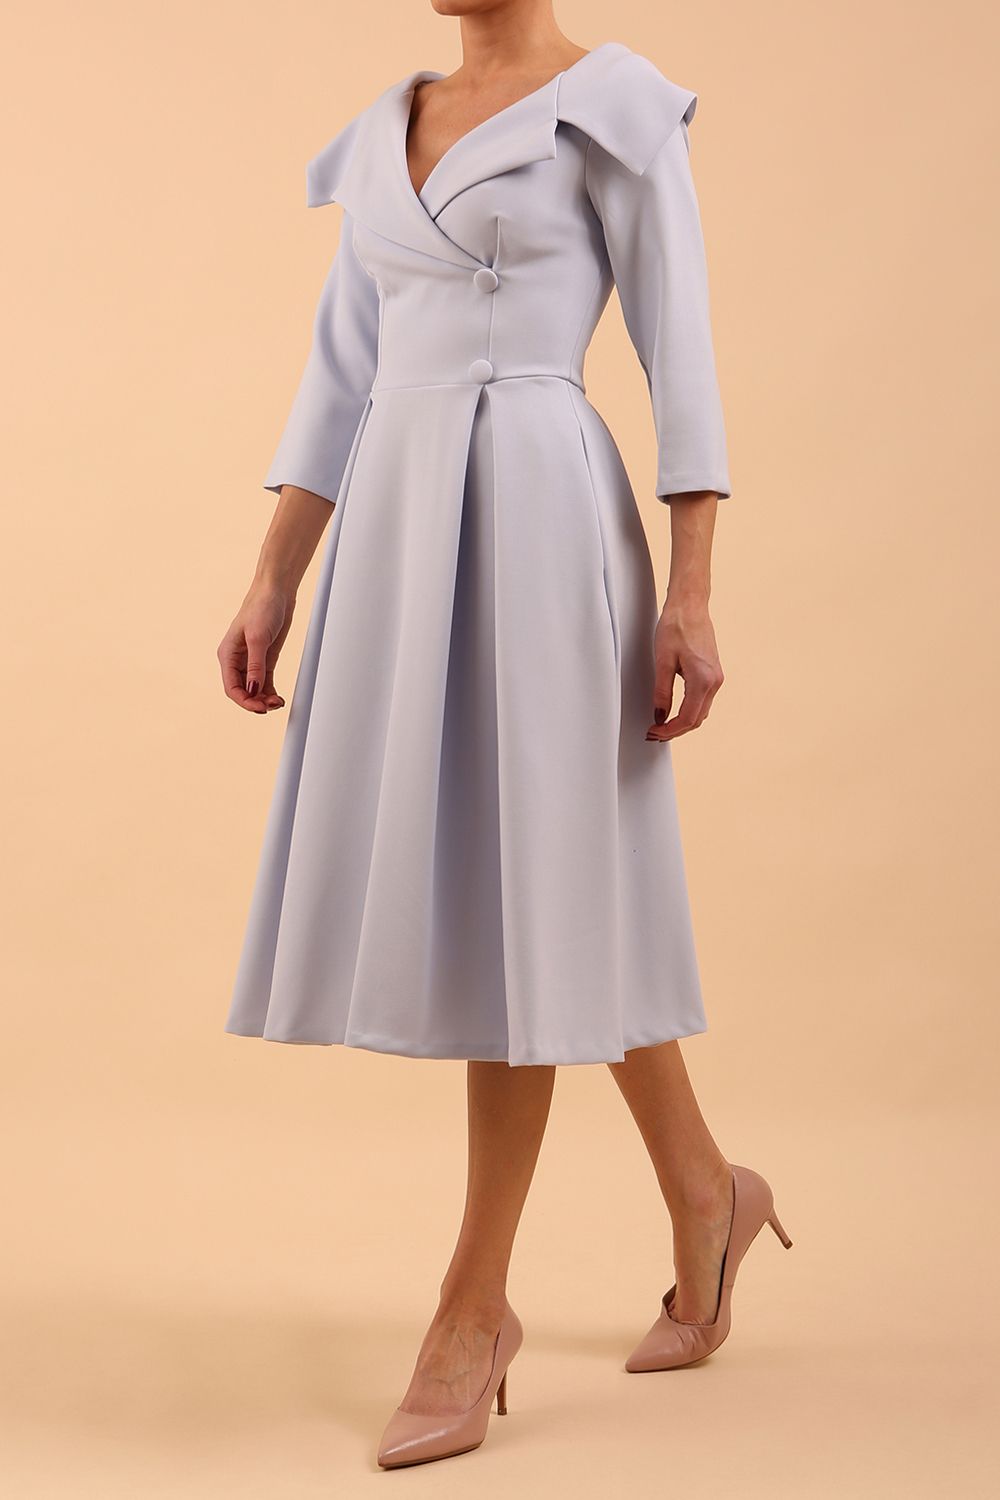 model is wearing a sleeved oversized collar swing dress with button detail at the front and pockets in the skirtmodel is wearing diva catwalk gatsby swing dress with pocket detail and wide v-neck collar and buttons down the front panel in fuchsia pink front